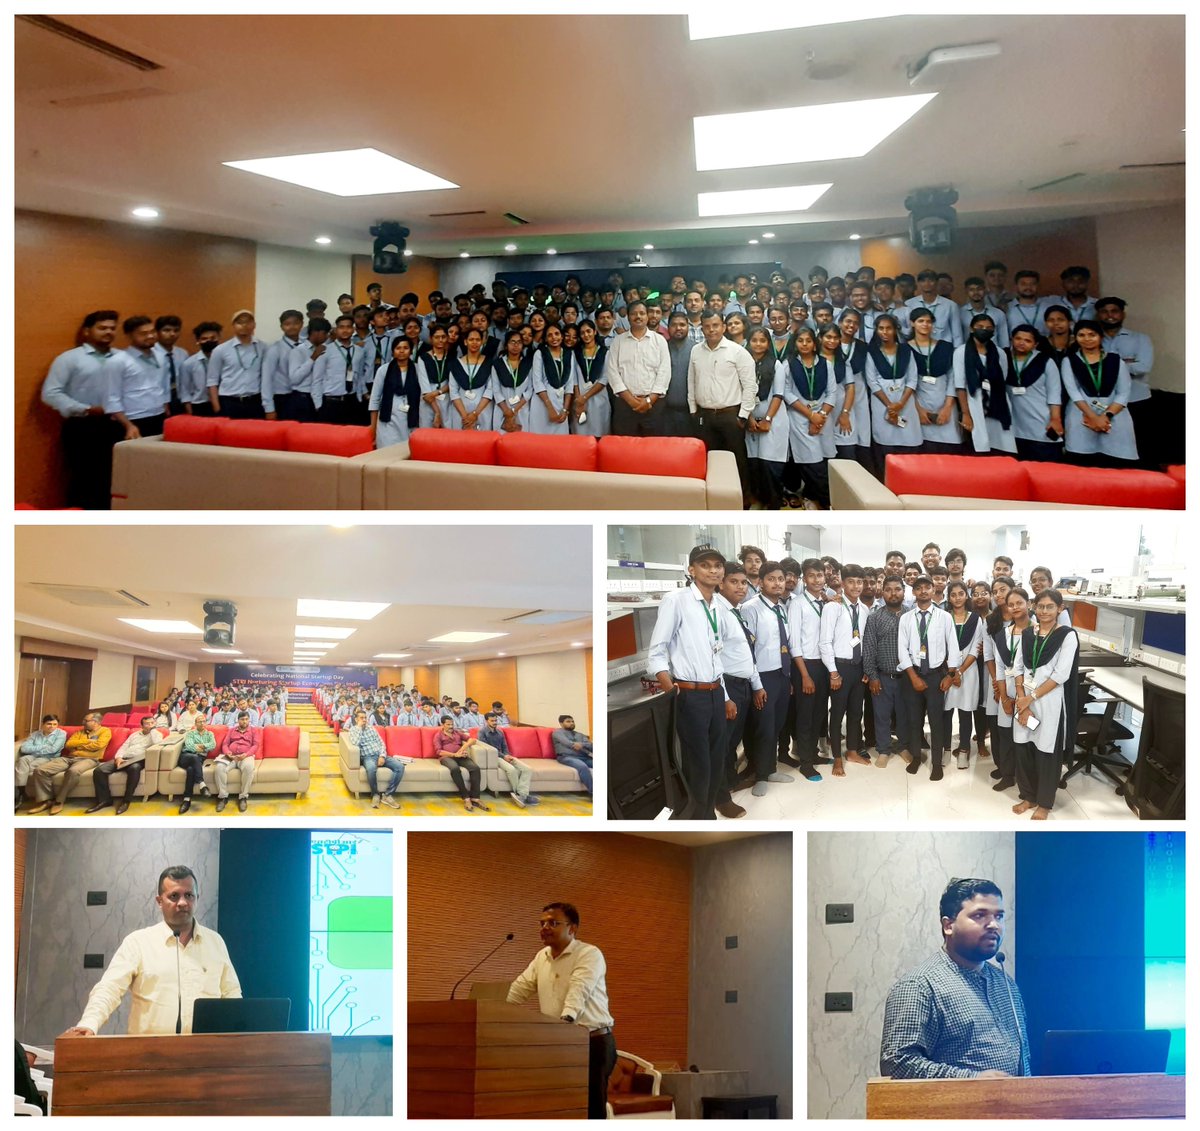 Students of GIET University had an industrial visit to @stpiepbbs.During the visit they witnessed Technical talk by industry experts from @Elfonze_Tech, explored opportunities in ESDM sector, NGIS Chunauti @stpiindia @MSH_MeitY @Rajeev_GoI @arvindtw @DeveshTyagii @s_subodh